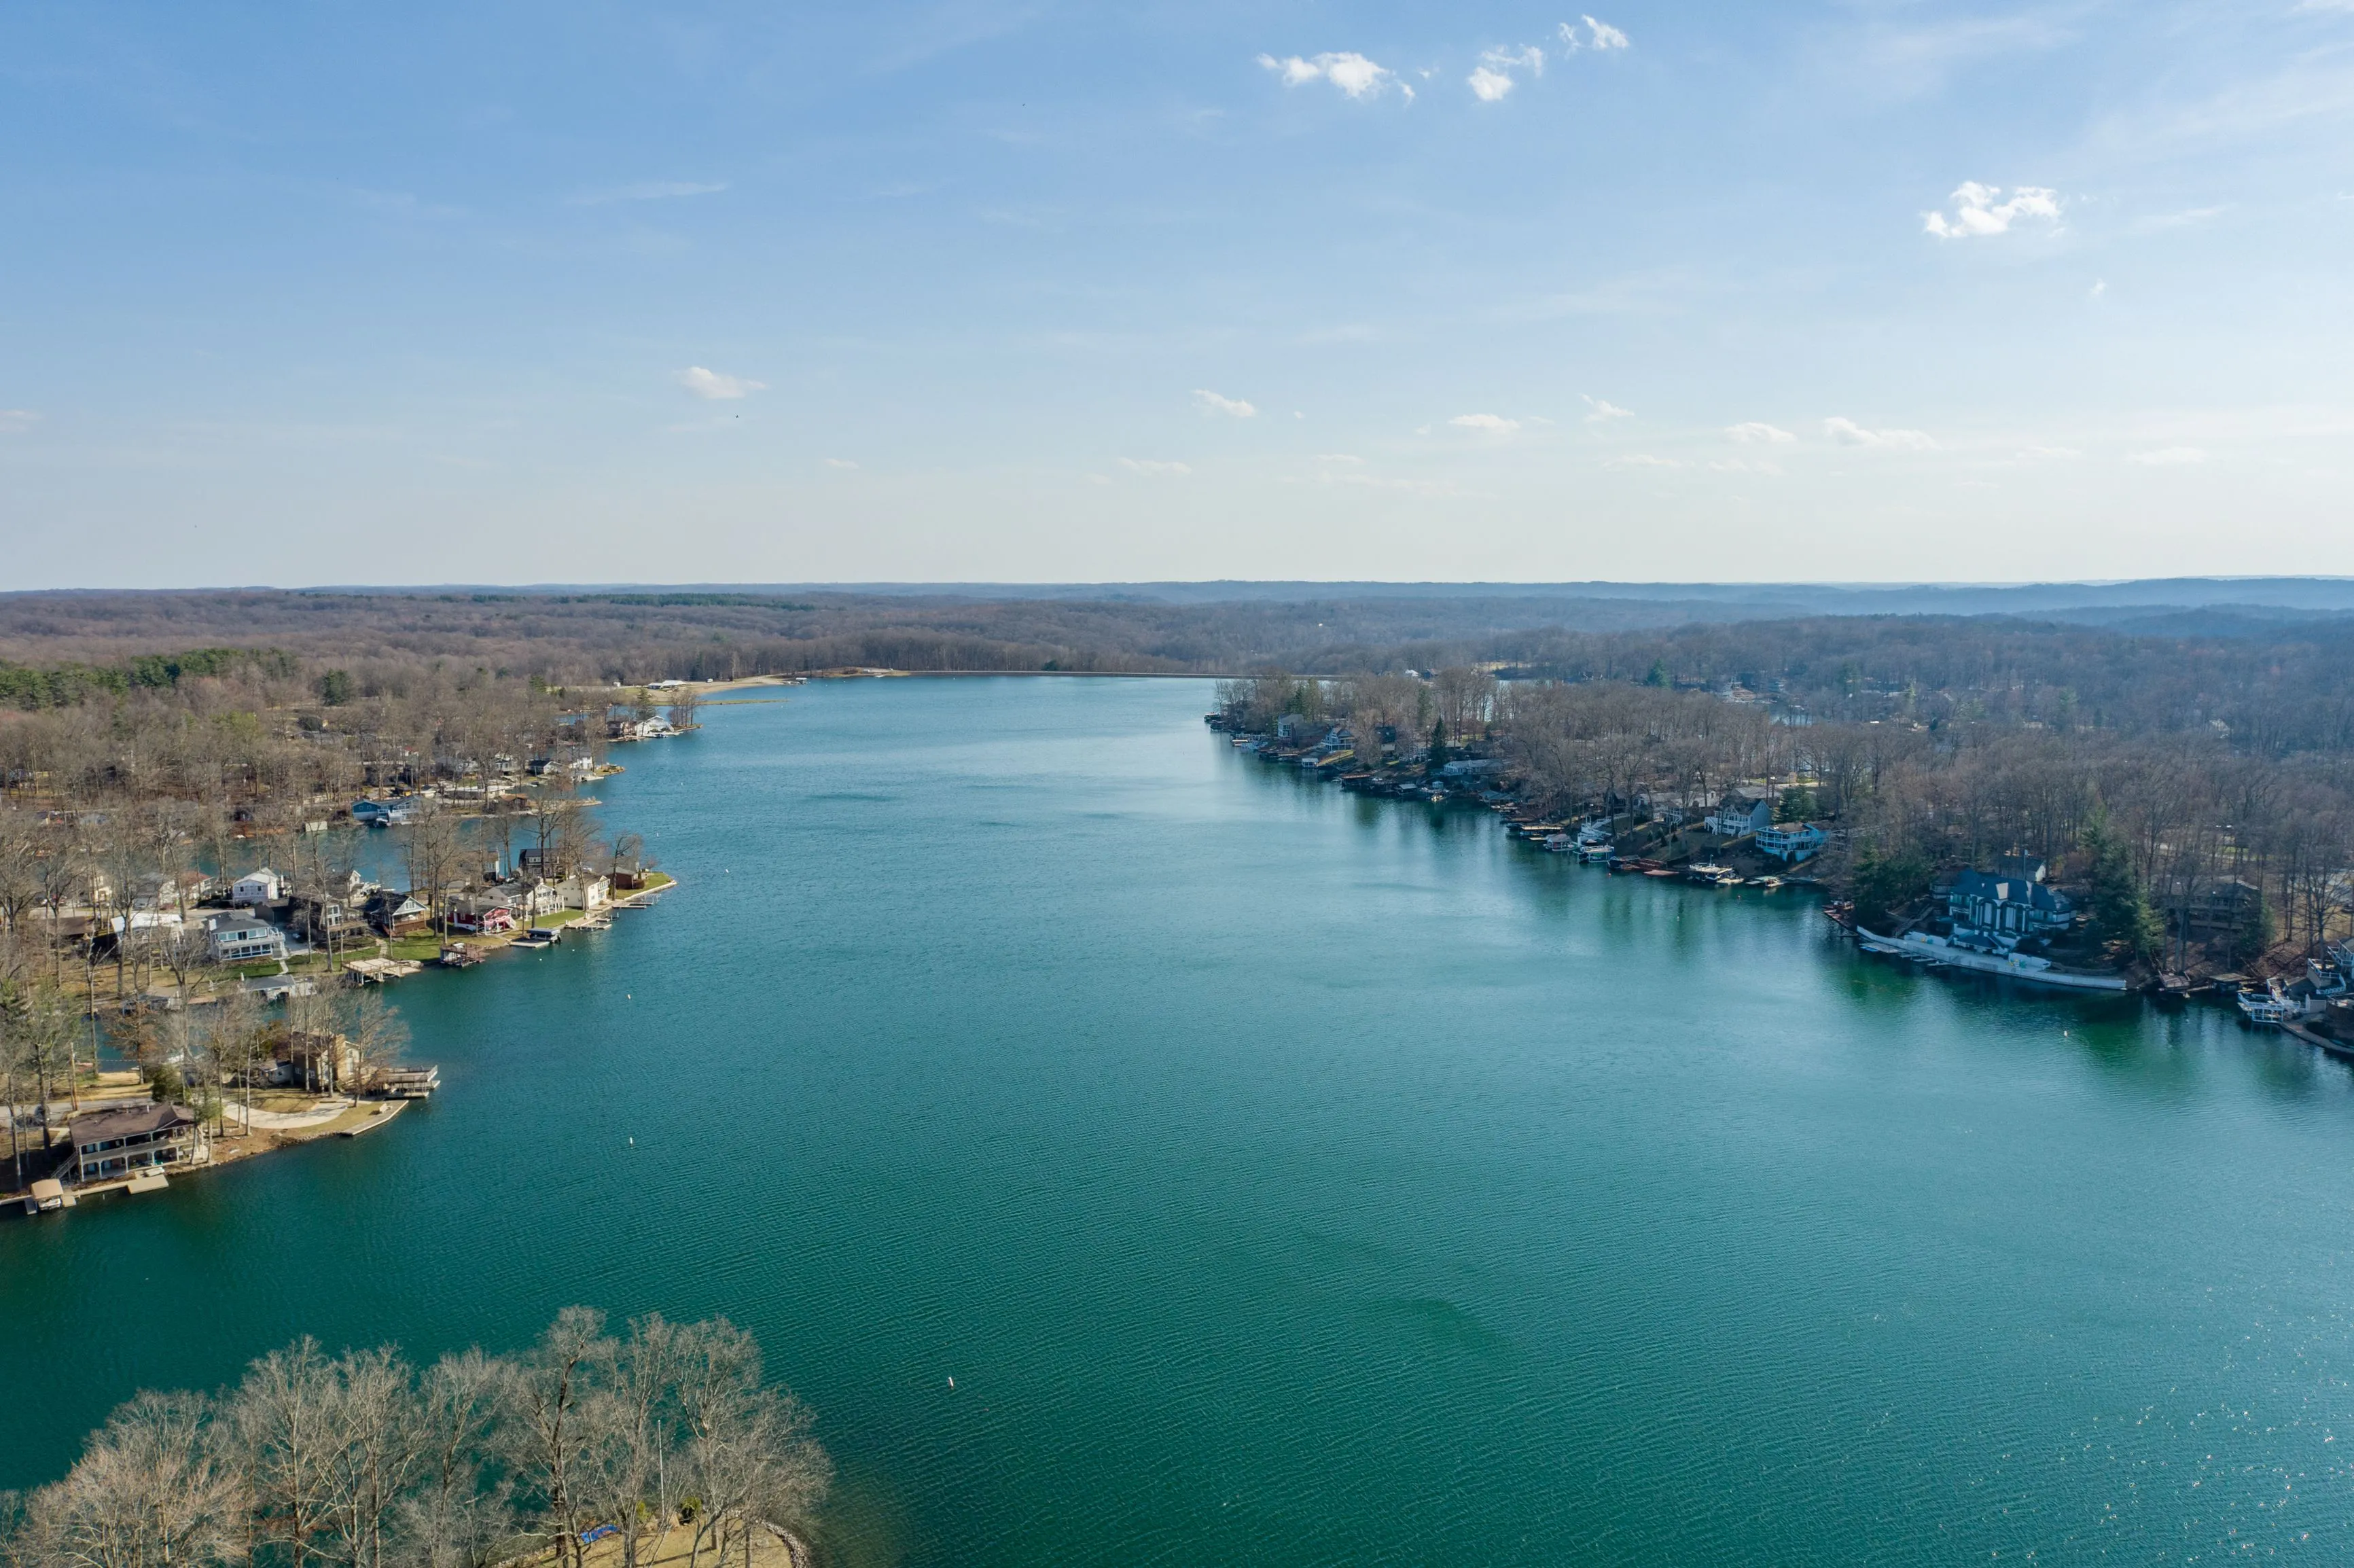 Aerial view of a serene lake with surrounding residential areas and dense trees under a clear blue sky.